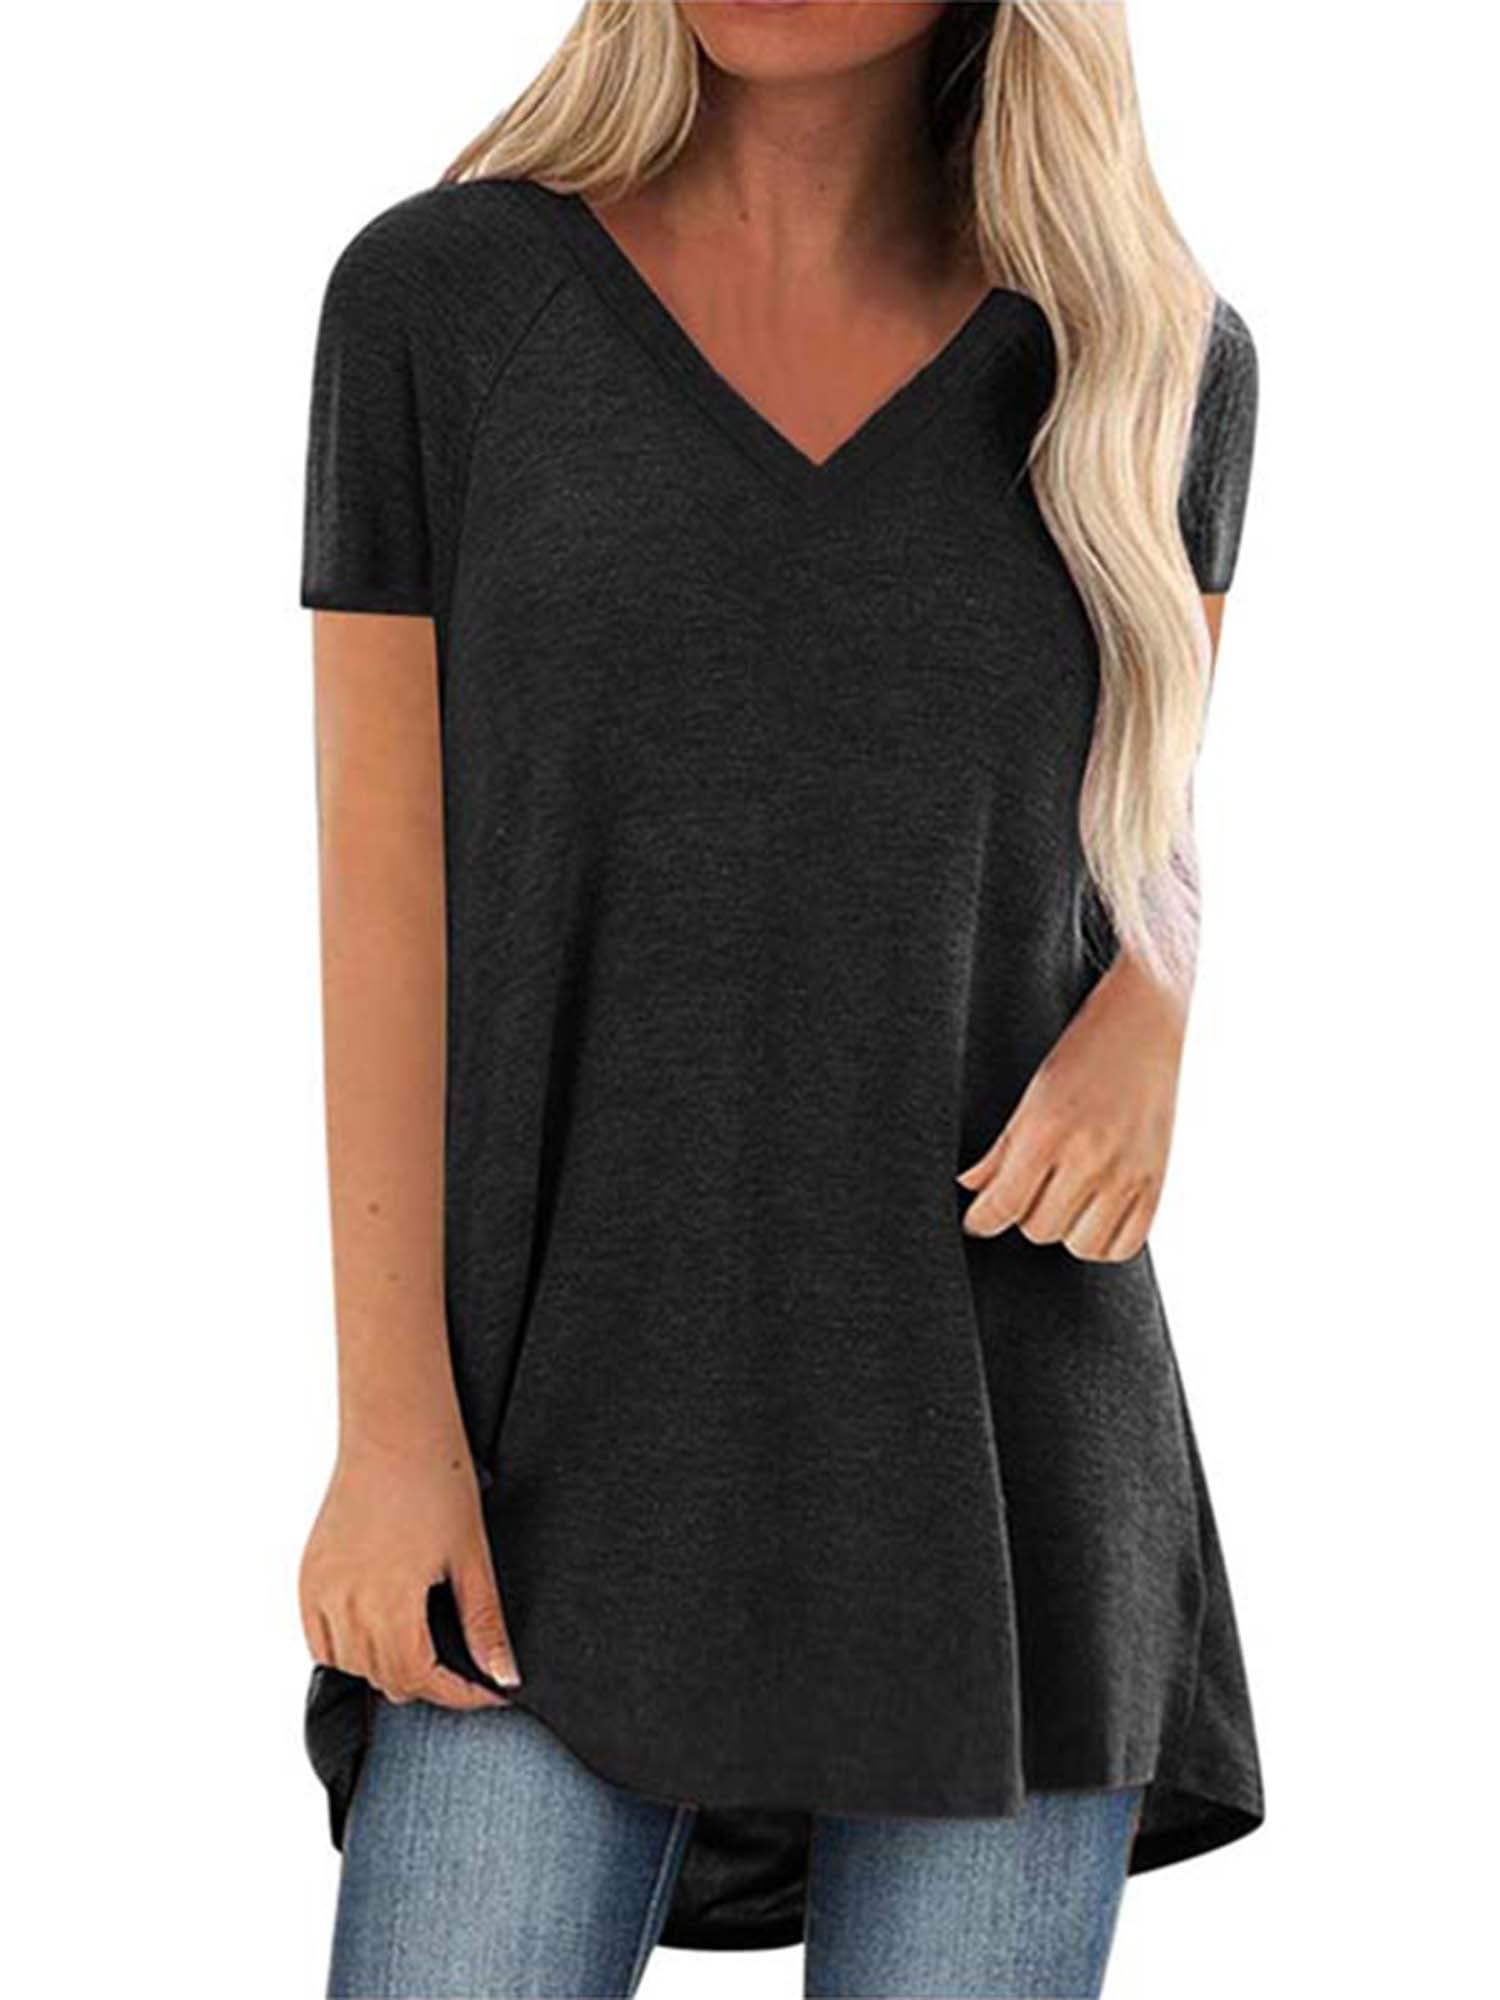 Women's Short Sleeve T Shirt Plus Size Tops Casual V Neck Tunic Loose Blouse